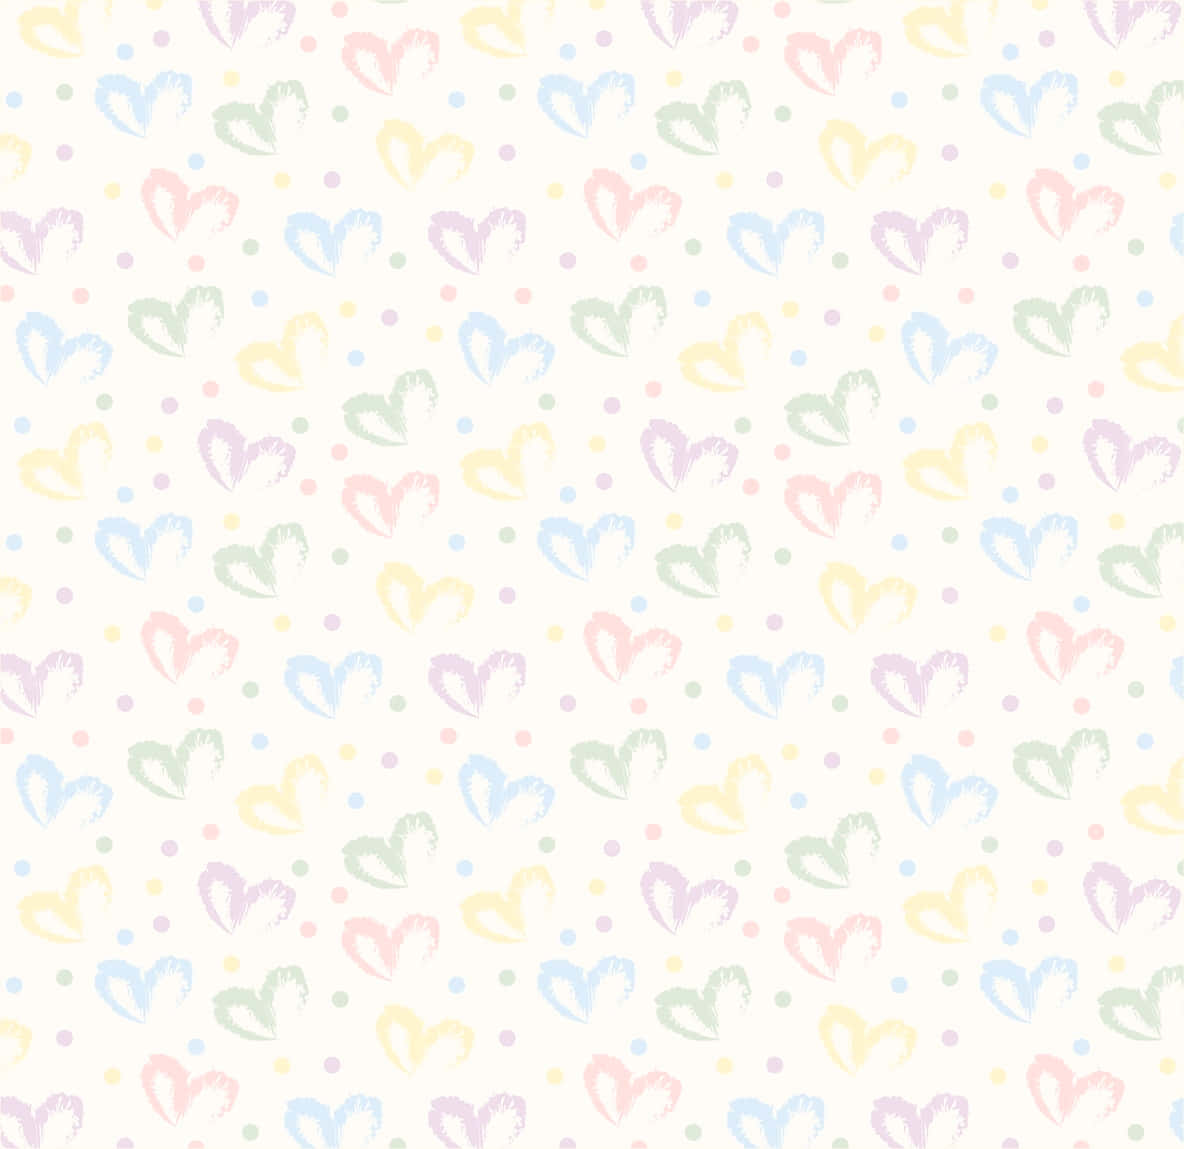 A Colorful Pattern With Hearts On A White Background